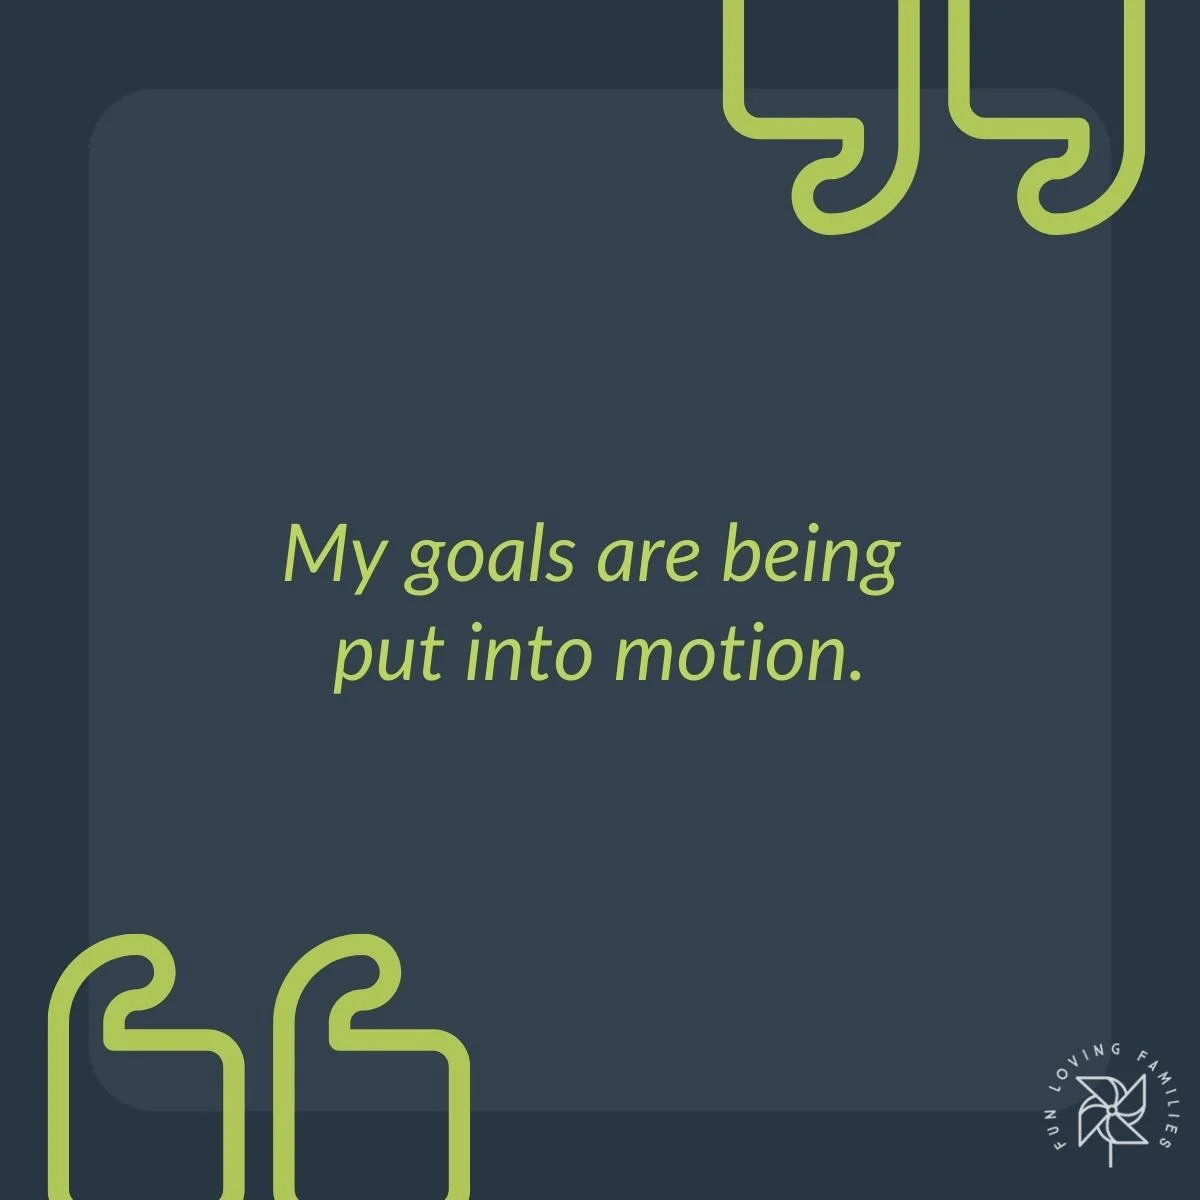 My goals are being put into motion affirmation image